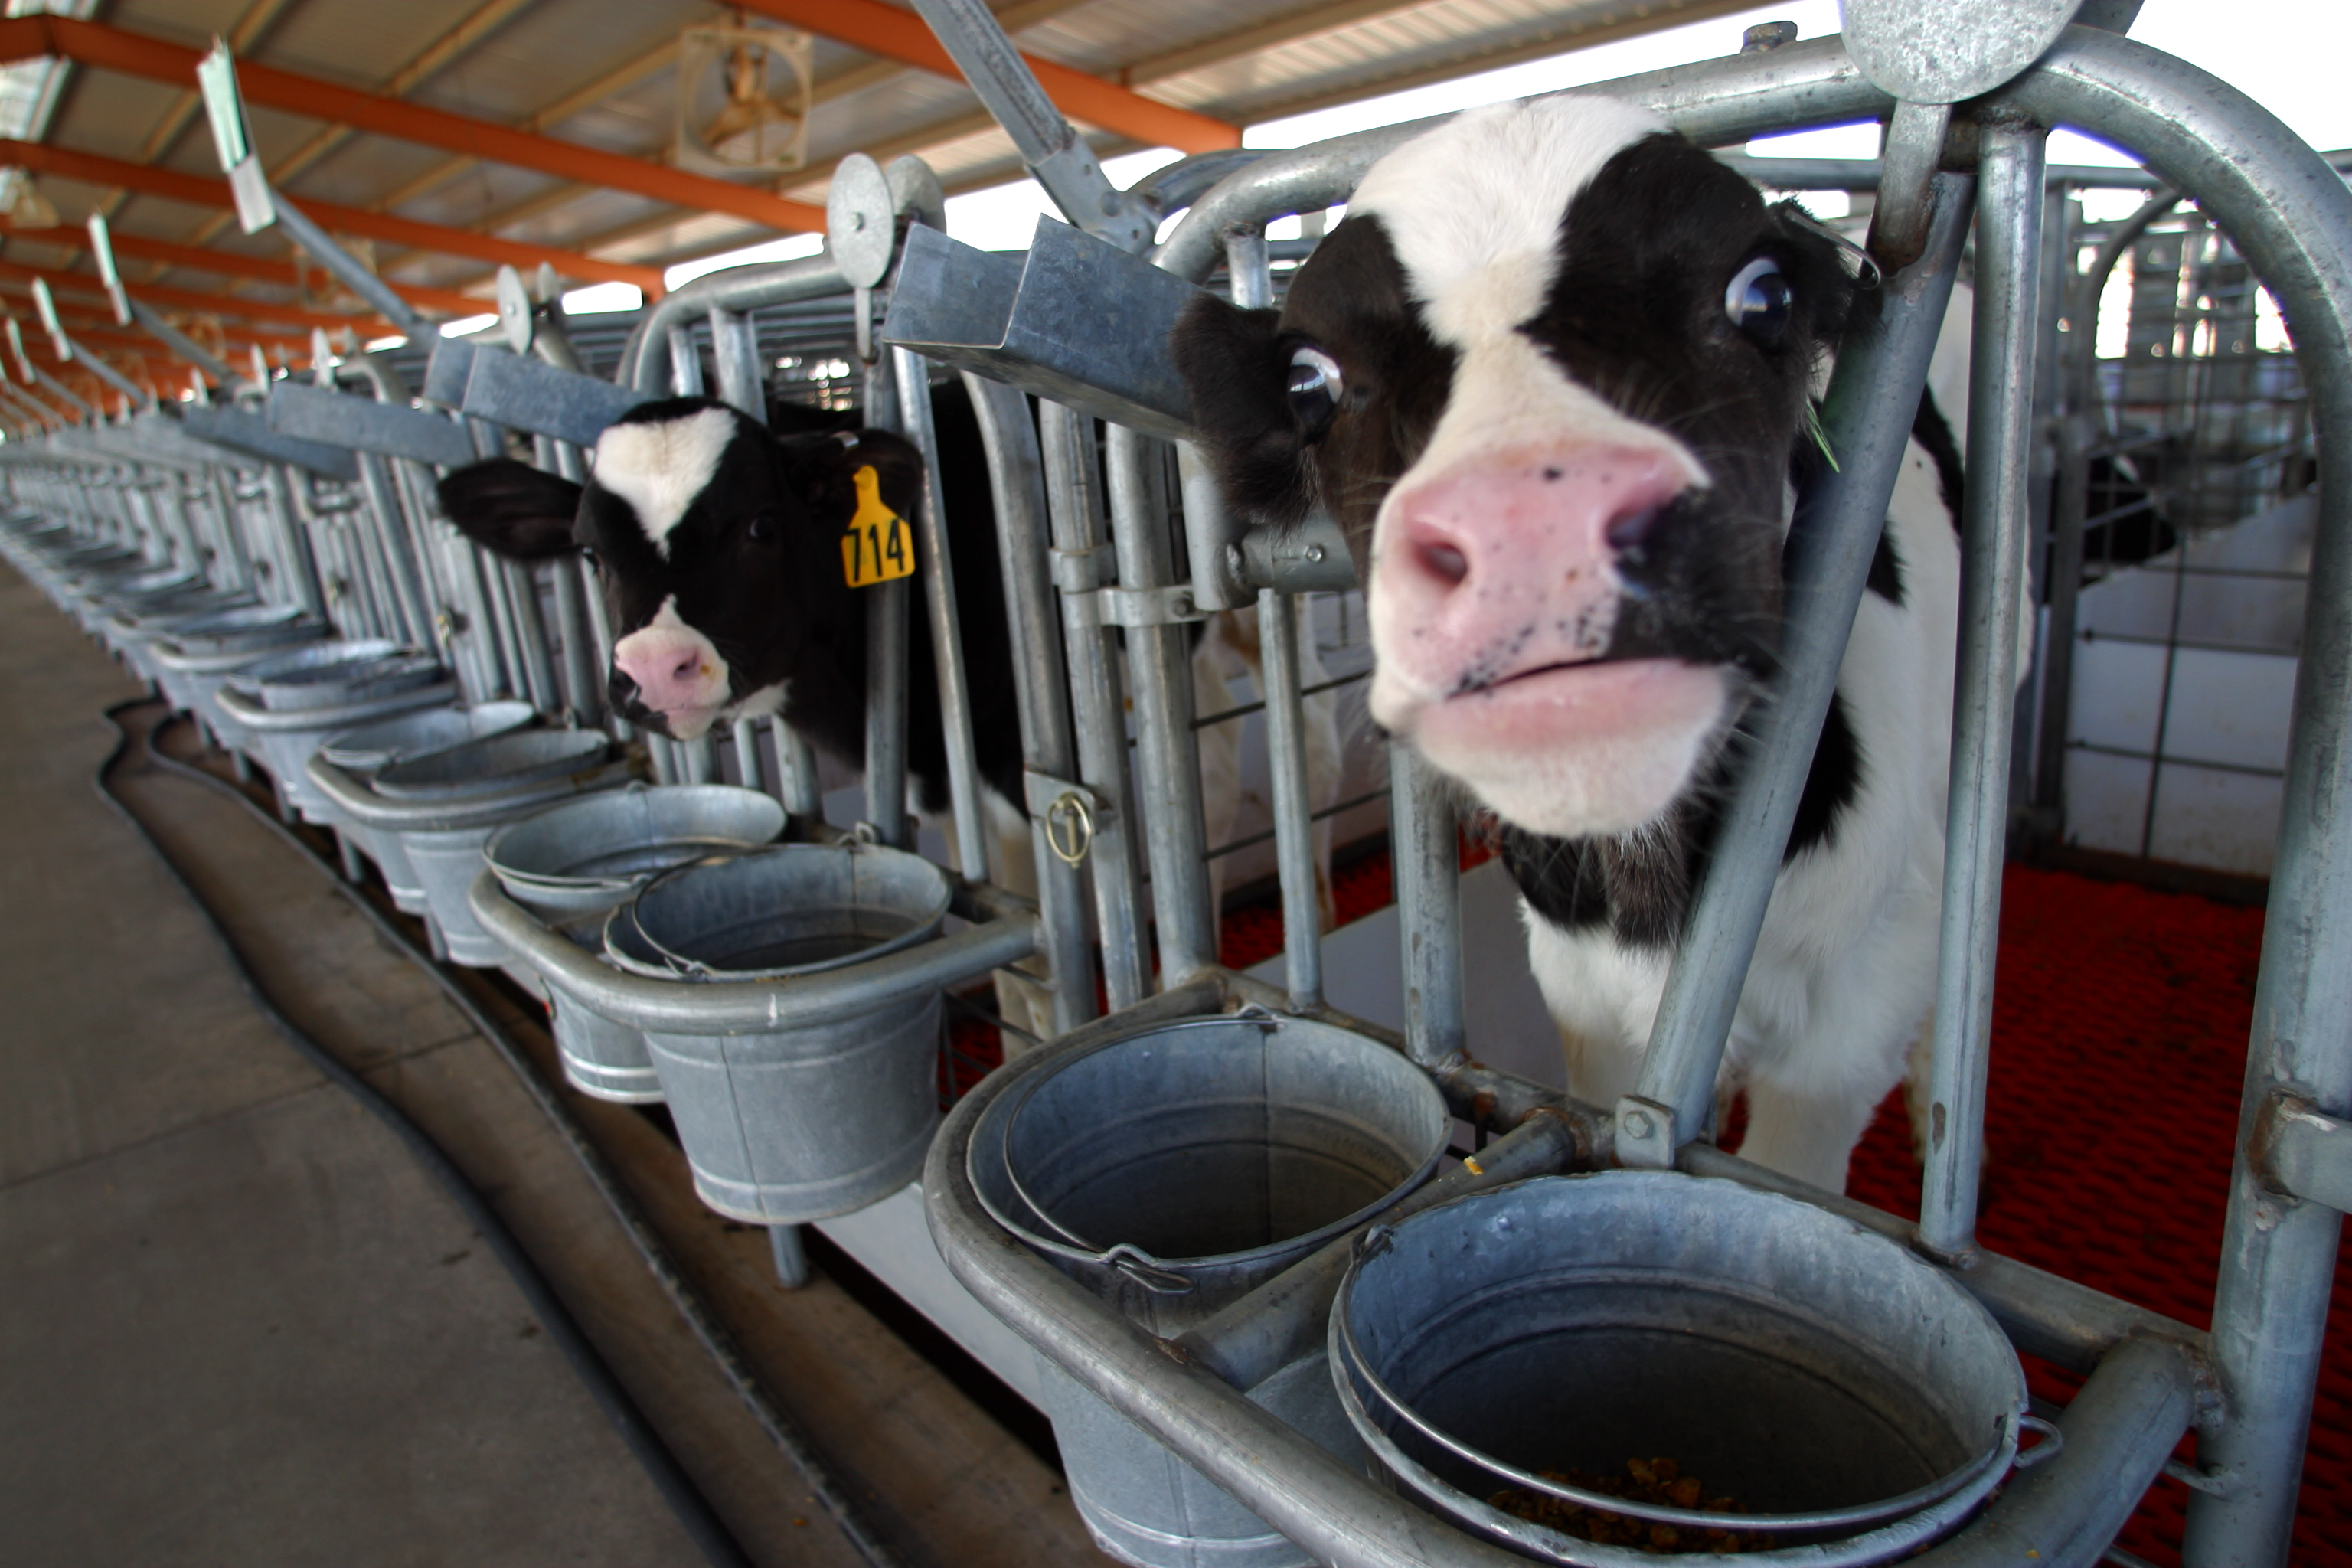 11 MARCH 2003 -- BUCKEYE, ARIZONA: A Holstein calves at the Triple G Dairy in Buckeye, AZ, March 11, 2003. The Triple G is one the most technologically advanced dairies in Arizona. More than 3,000 cows per day are milked at the dairy on two rotating carousels which hold 48 cows a piece. PHOTO BY JACK KURTZ